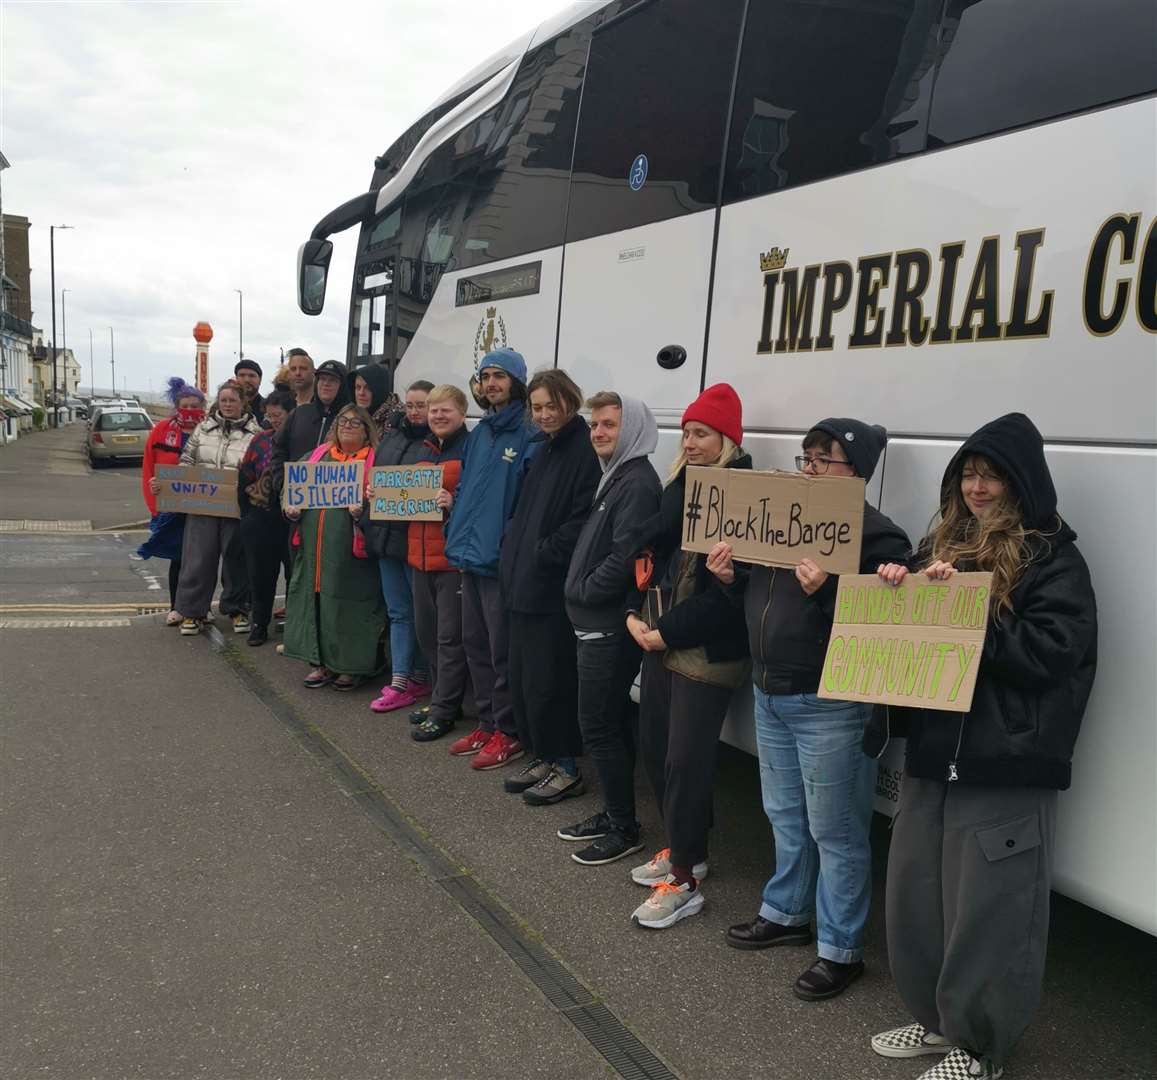 Protesters taking a stand in Margate to stop asylum seekers being taken from the town to the Bibby Stockholm